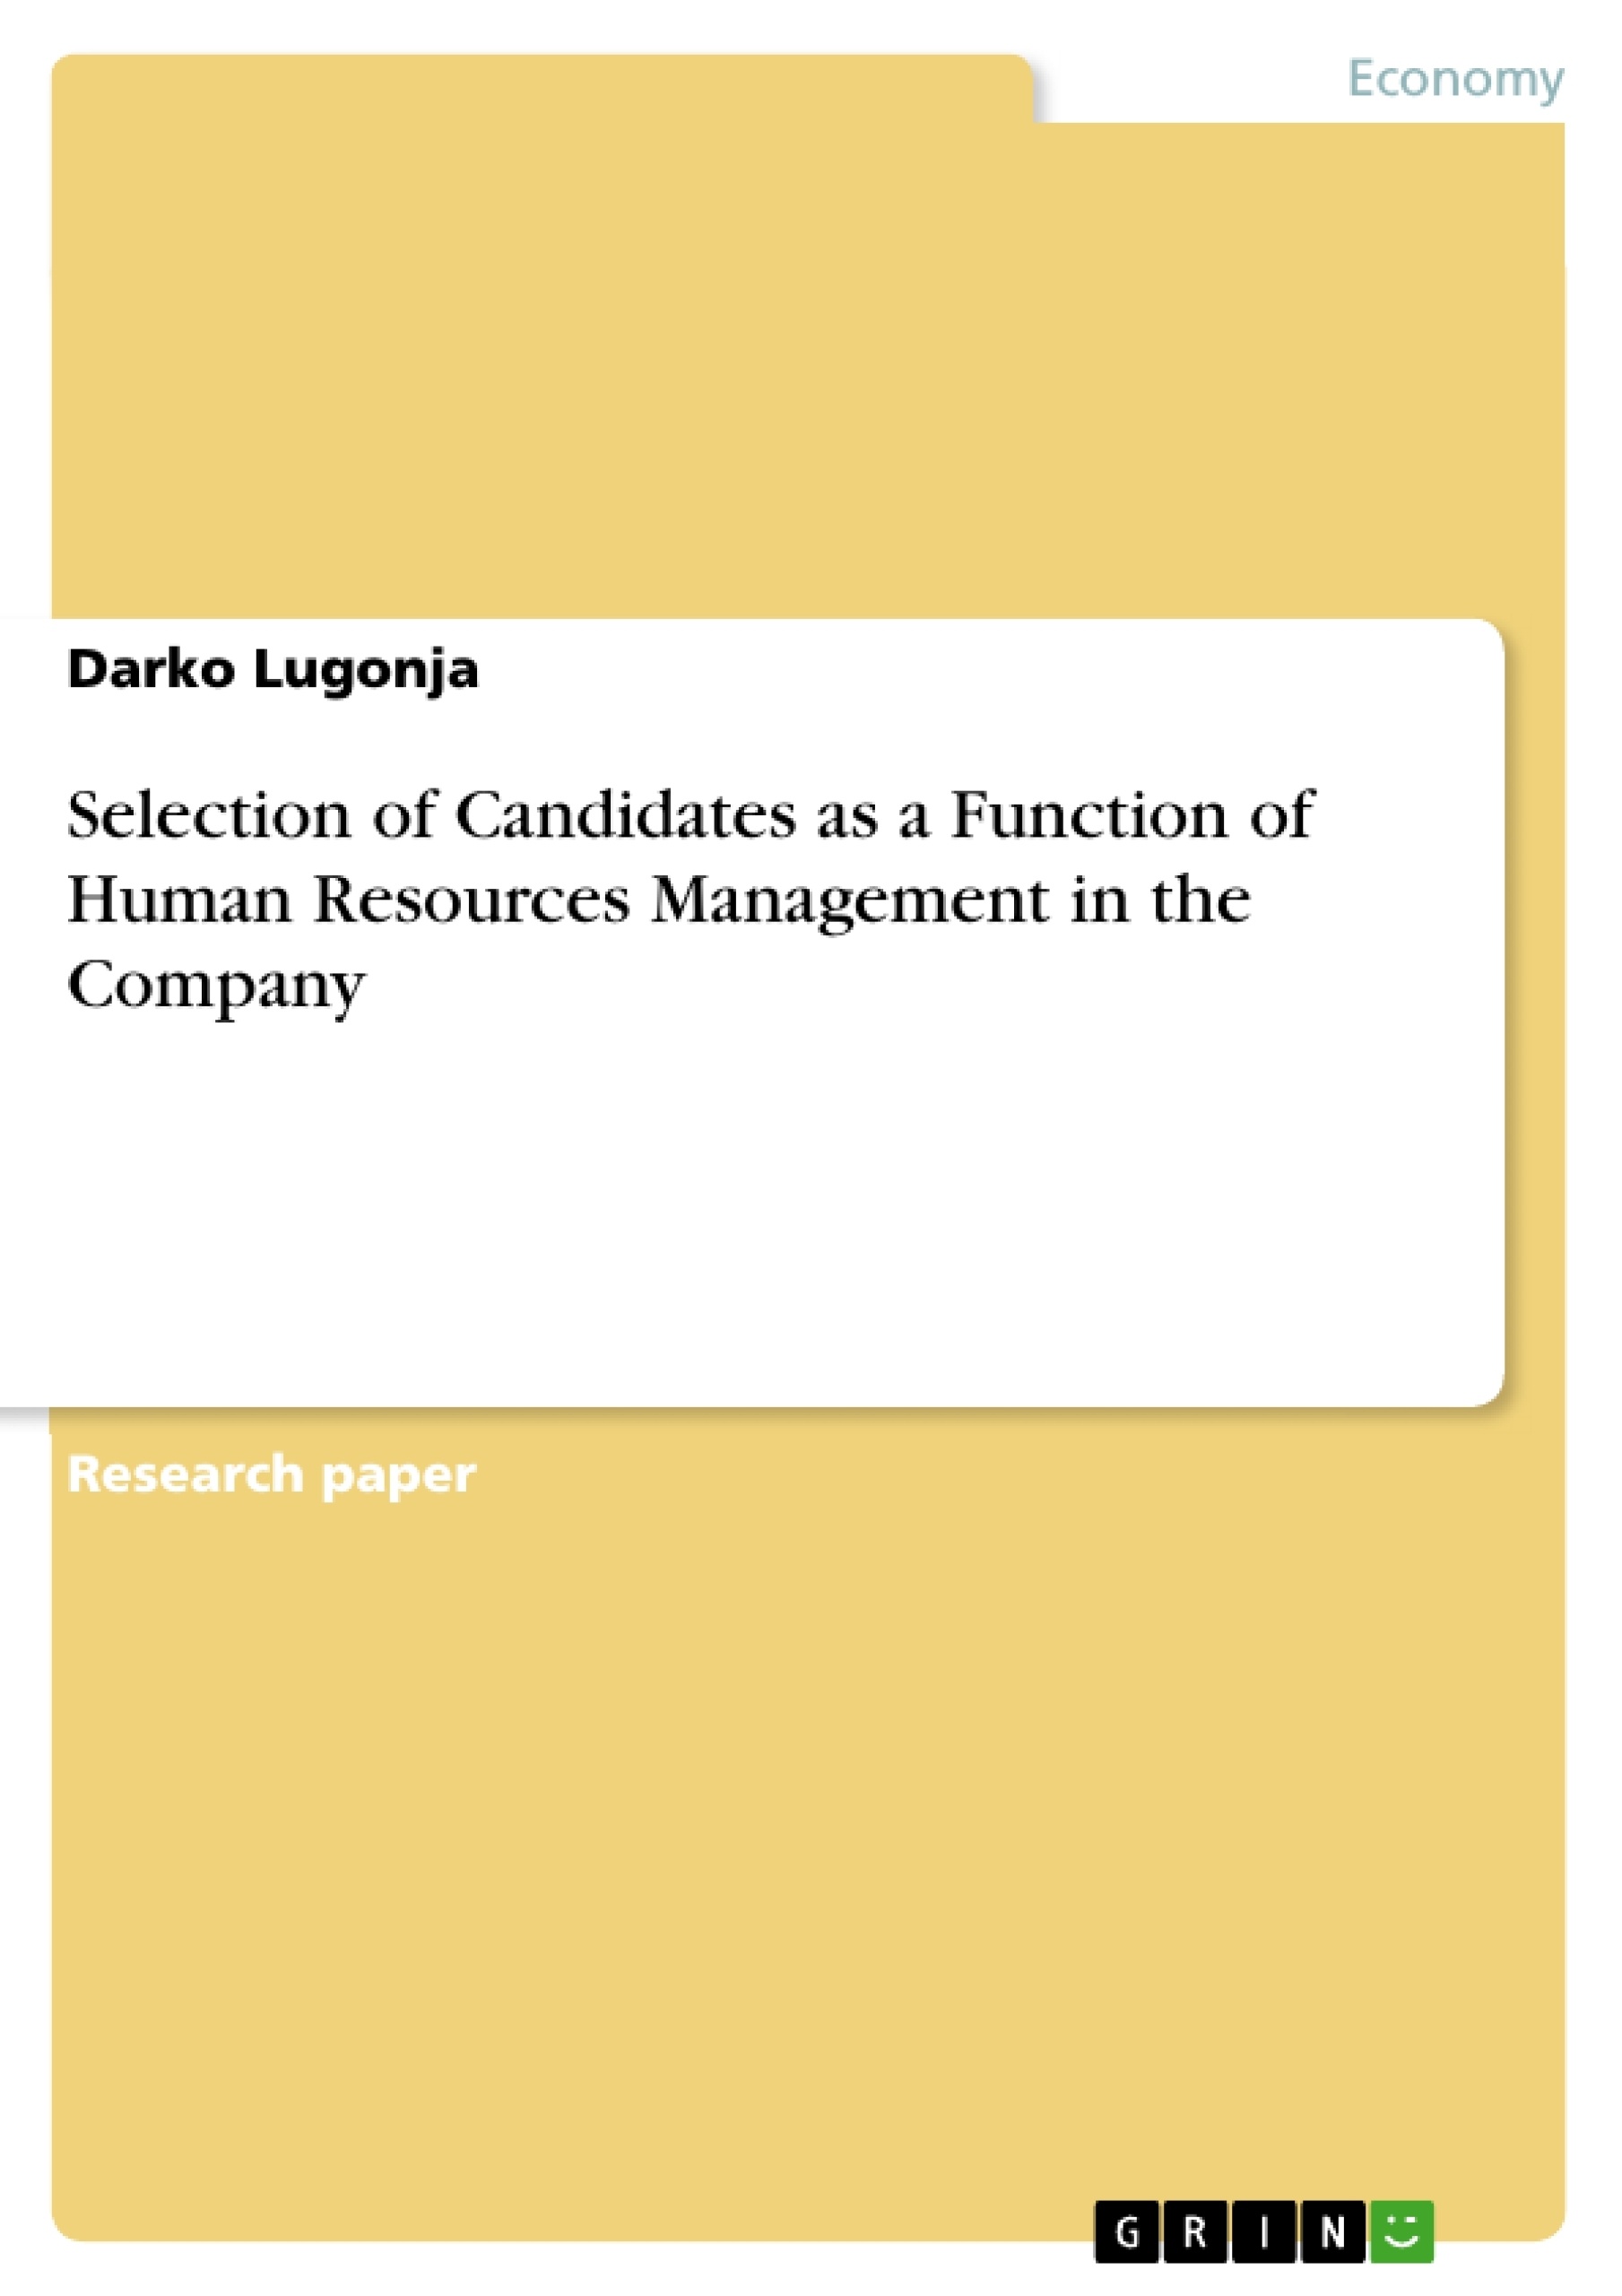 Titre: Selection of Candidates as a Function of Human Resources Management in the Company